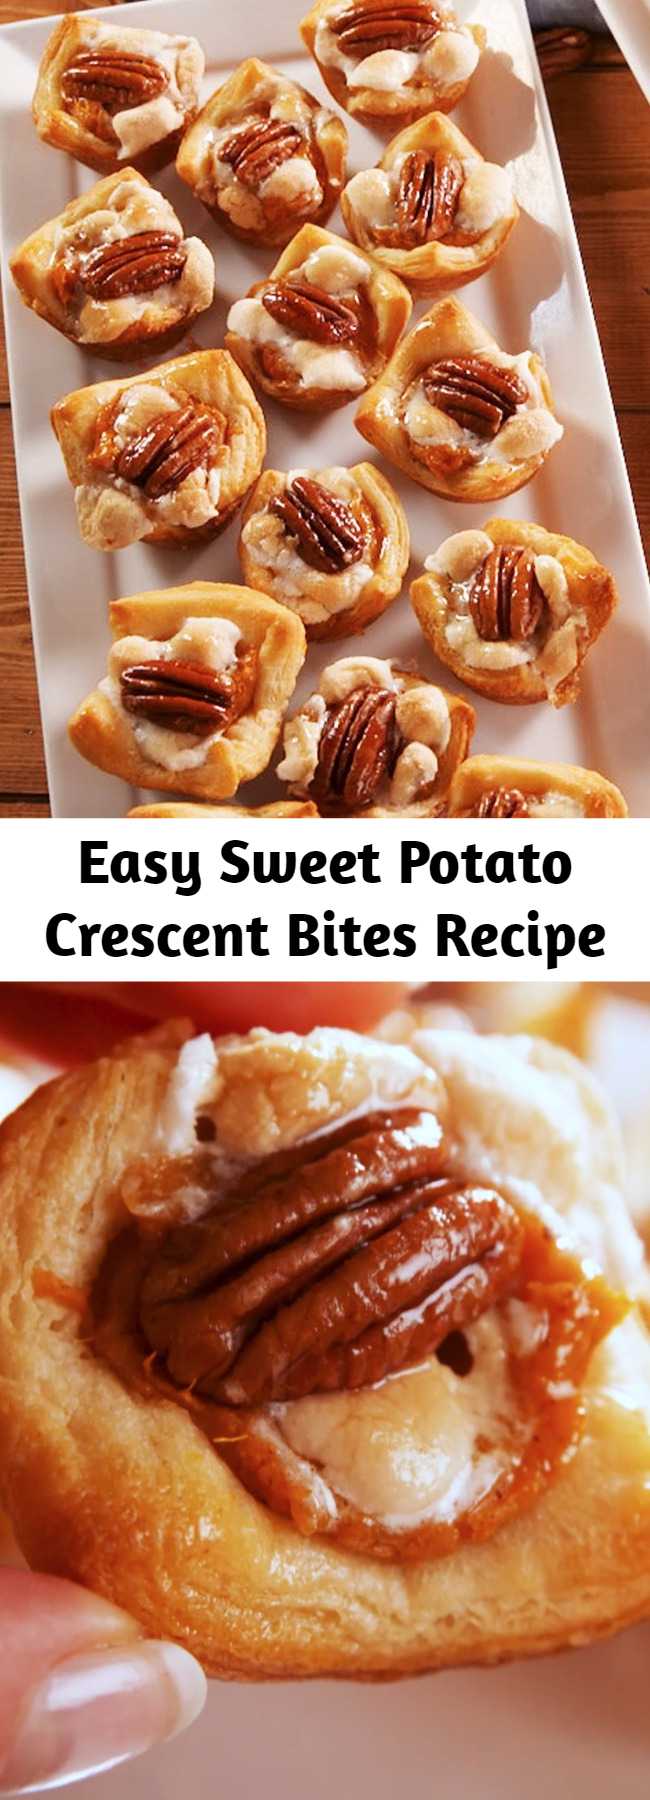 Easy Sweet Potato Crescent Bites Recipe - A guarantee: You will NOT be able to stop eating these little guys. They're the perfect amount of sweet and savory, so you can serve them before or after the big meal! Sweet Potato Crescent Bites from Delish.com are a great appetizer for this Thanksgiving. #easy #recipe #thanksgiving #holiday #app #appetizer #fingerfoods #Pecan #crescentrolls #sweetpotato #potato #marshmallows #minimarshmallows #quick